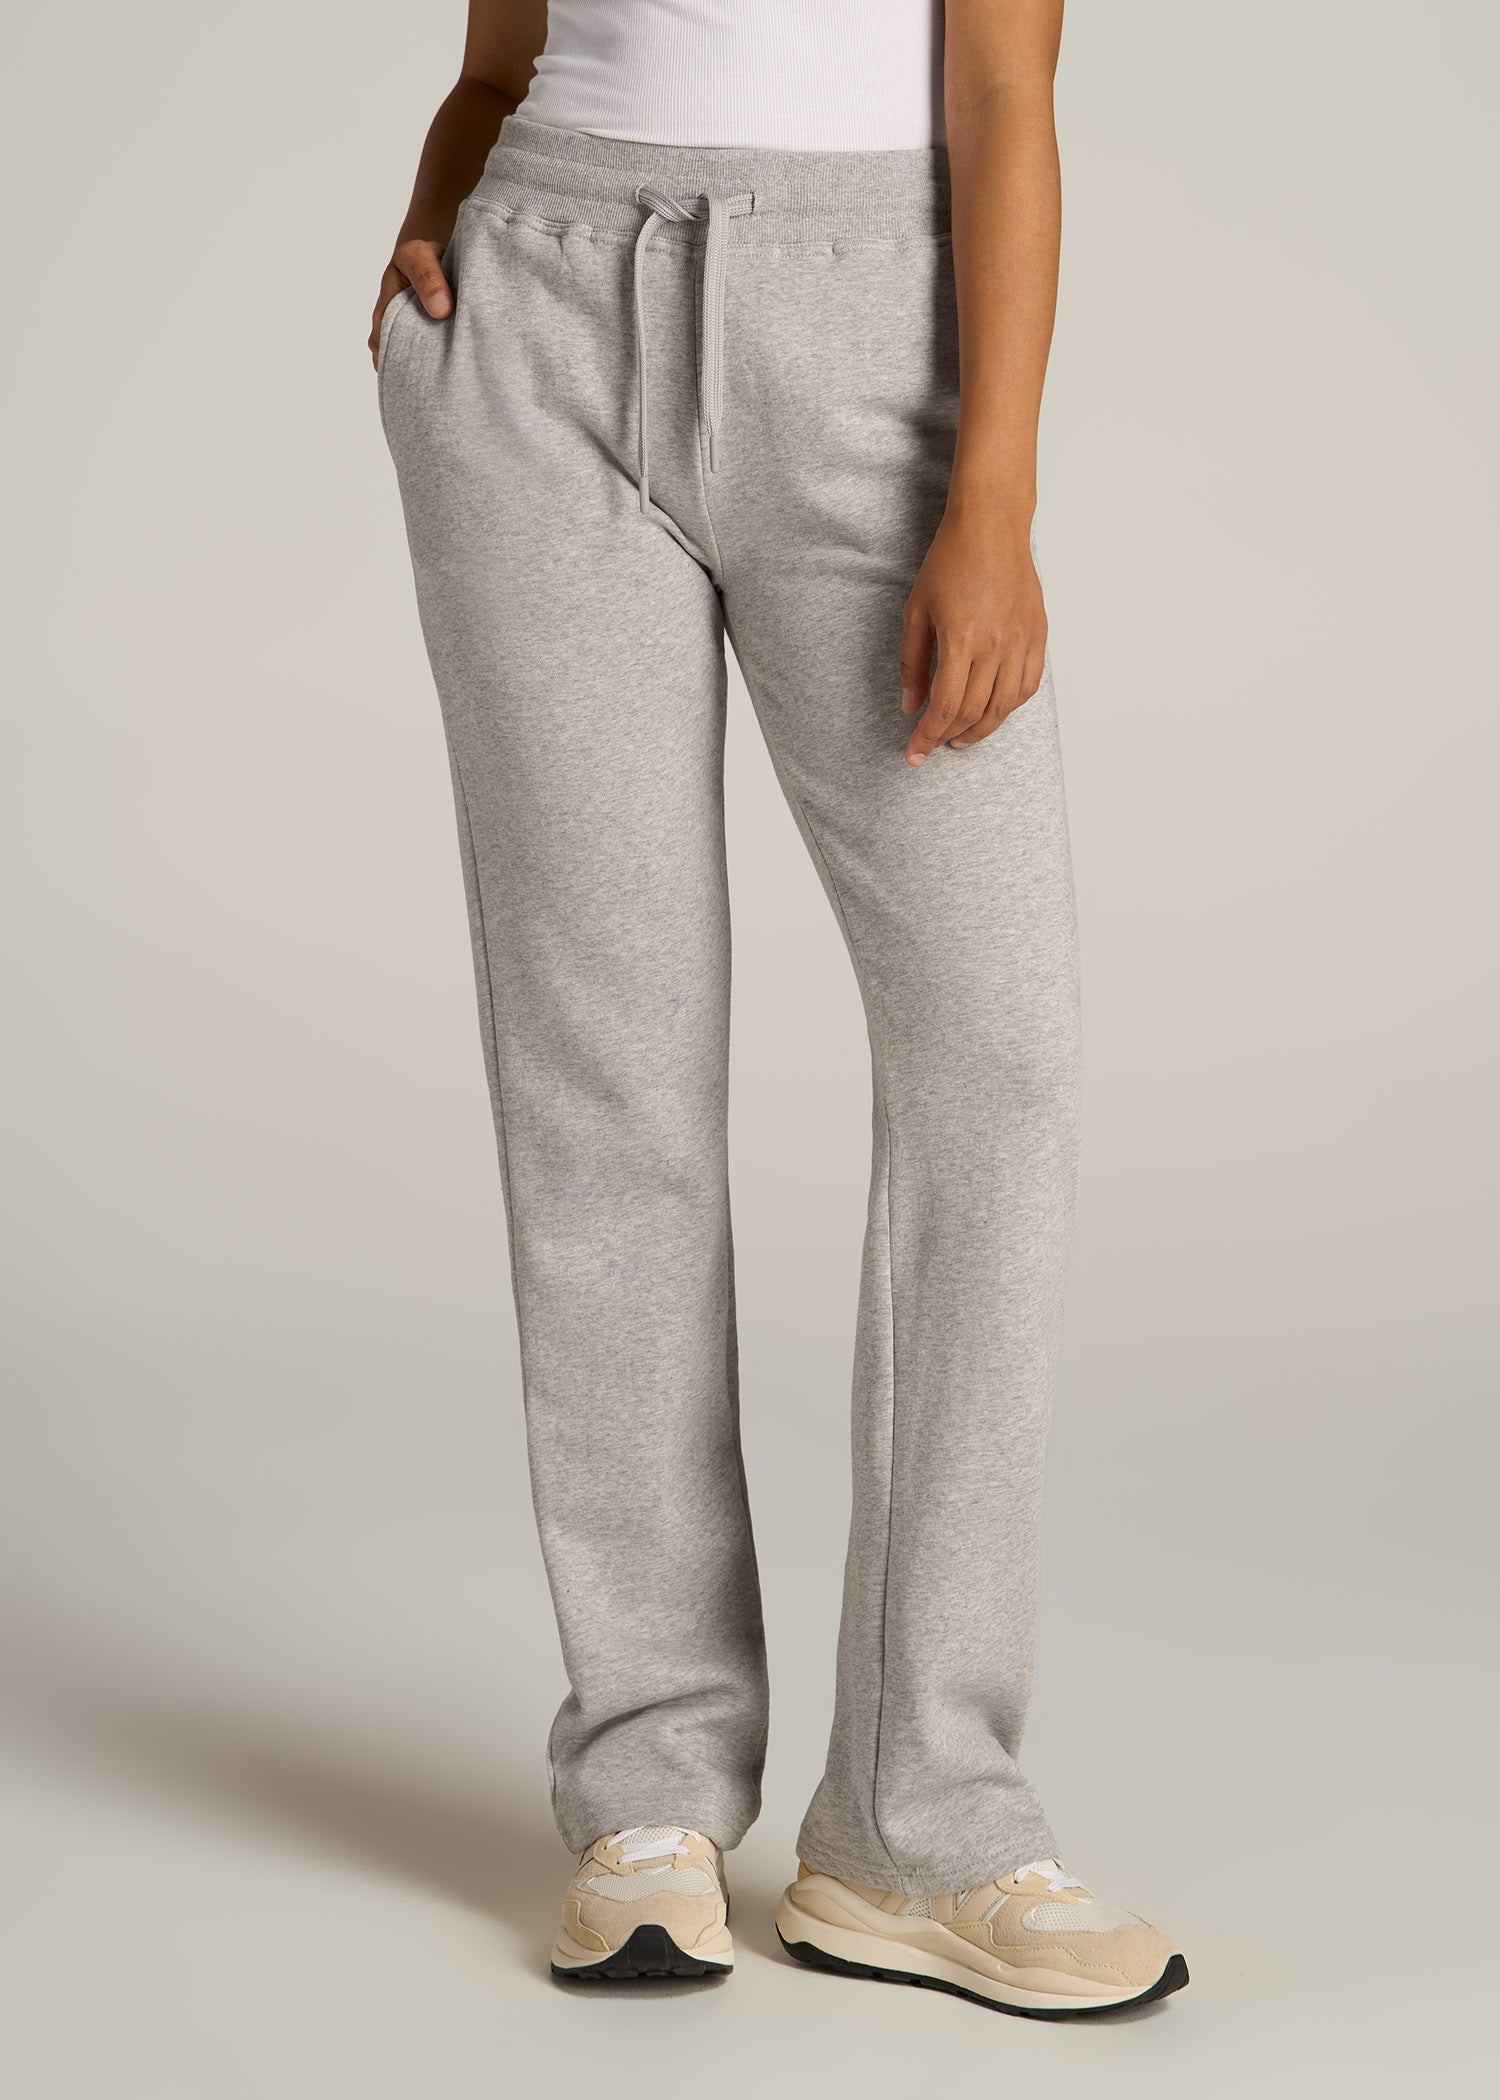 Tall Women's Cotton Flare Legging in Shadow Grey Mix